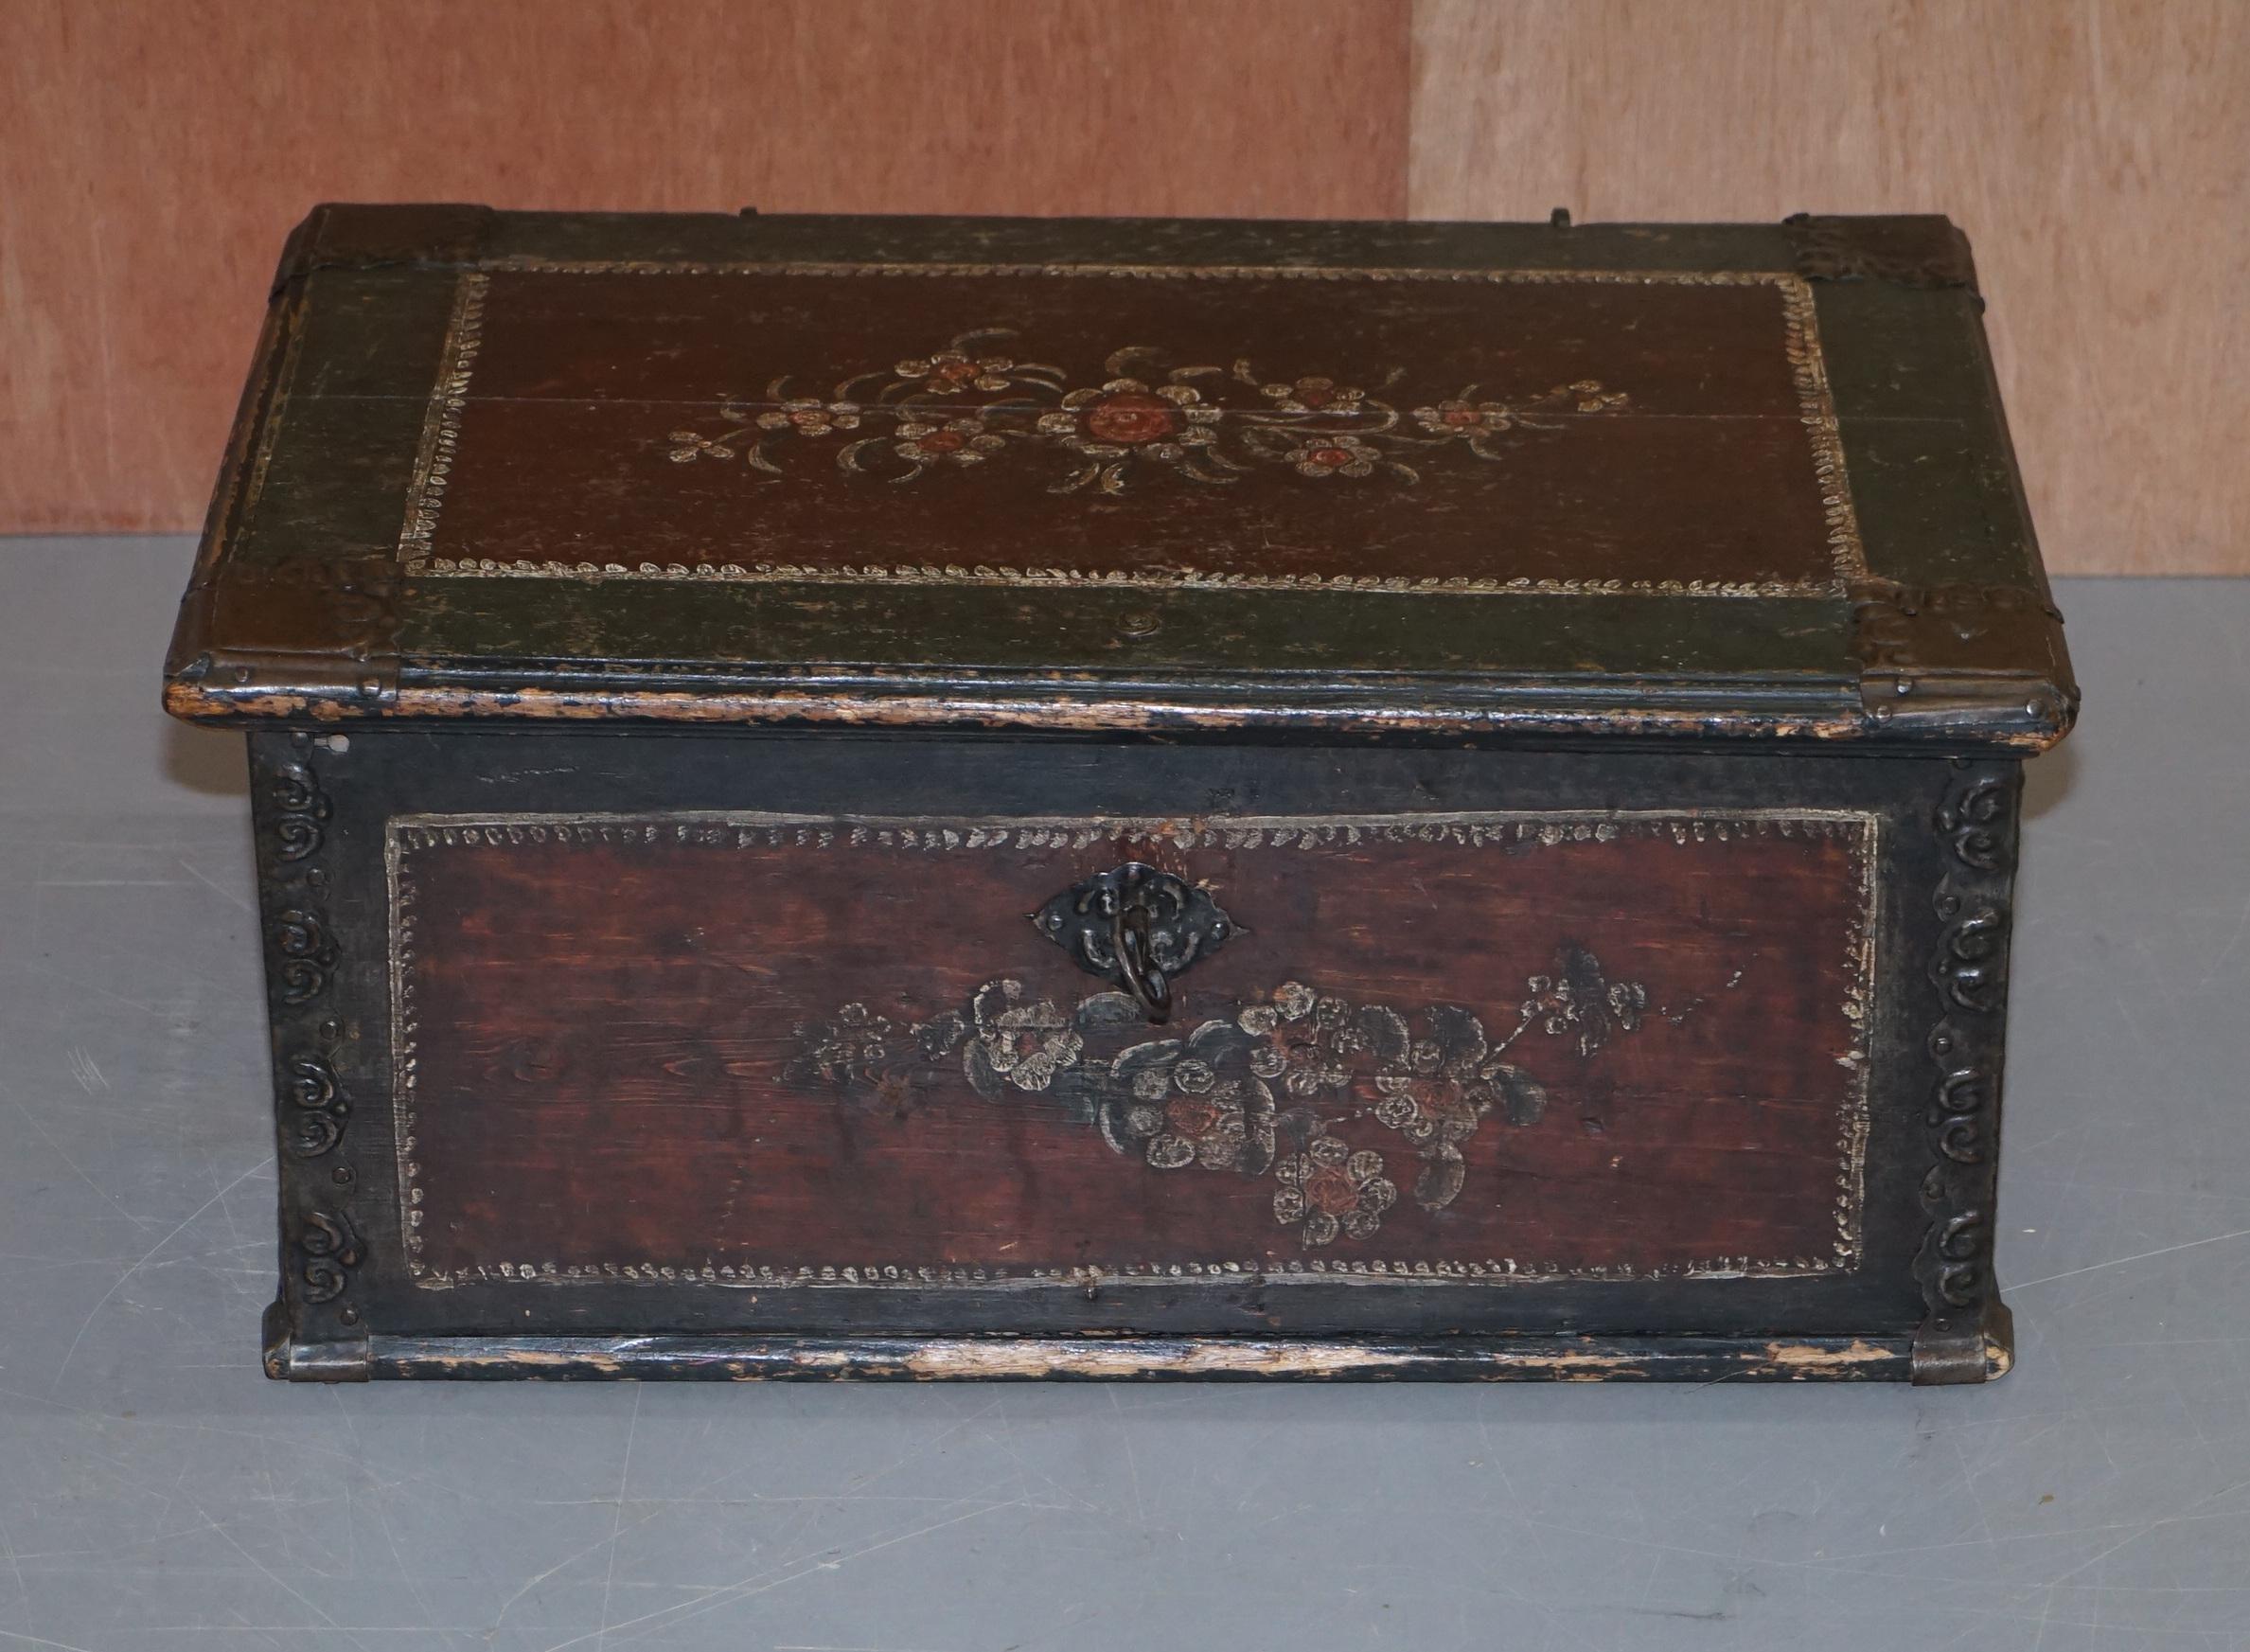 We are delighted to offer for sale this lovely original 1797 dated hand painted Portuguese trunk or chest

A very good looking and well made piece. A typical hand painted European piece which is highly collectable and very versatile. It comes